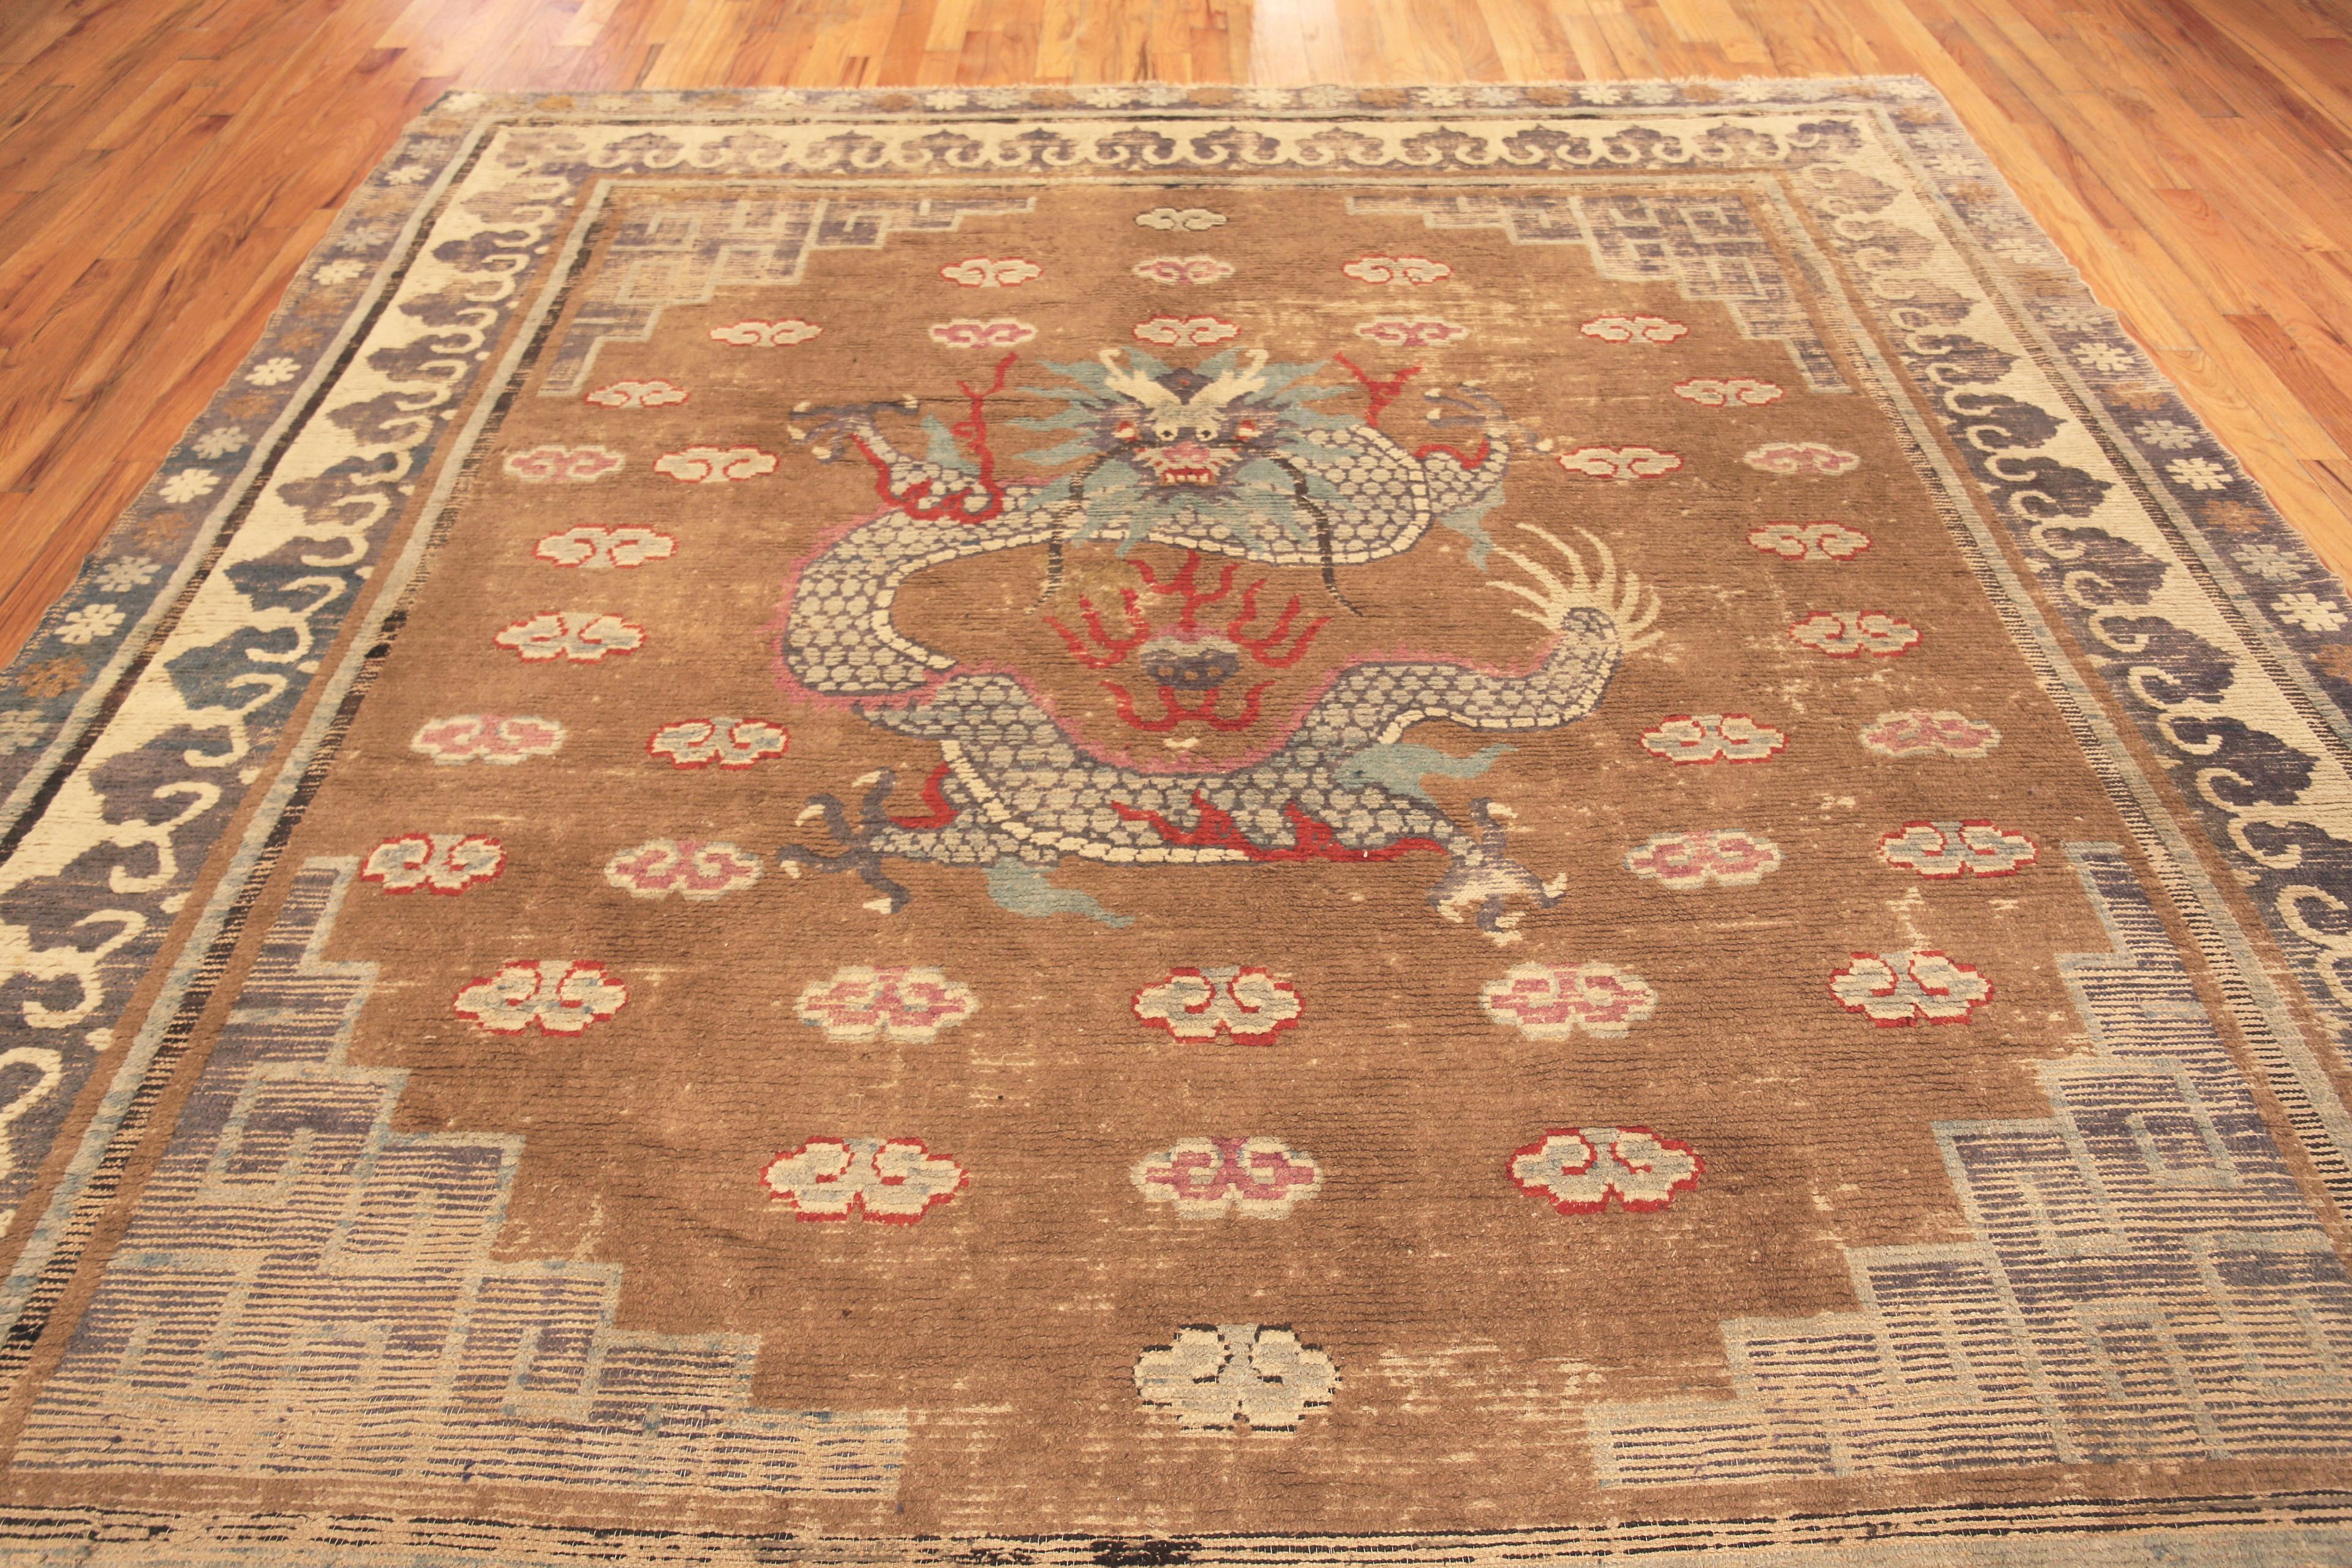 Tapis mongol ancien, Design/One, Pays d'origine : Mongolie, Circa date : 1880. Taille : 10 ft 3 in x 11 ft (3,12 m x 3,35 m)
 